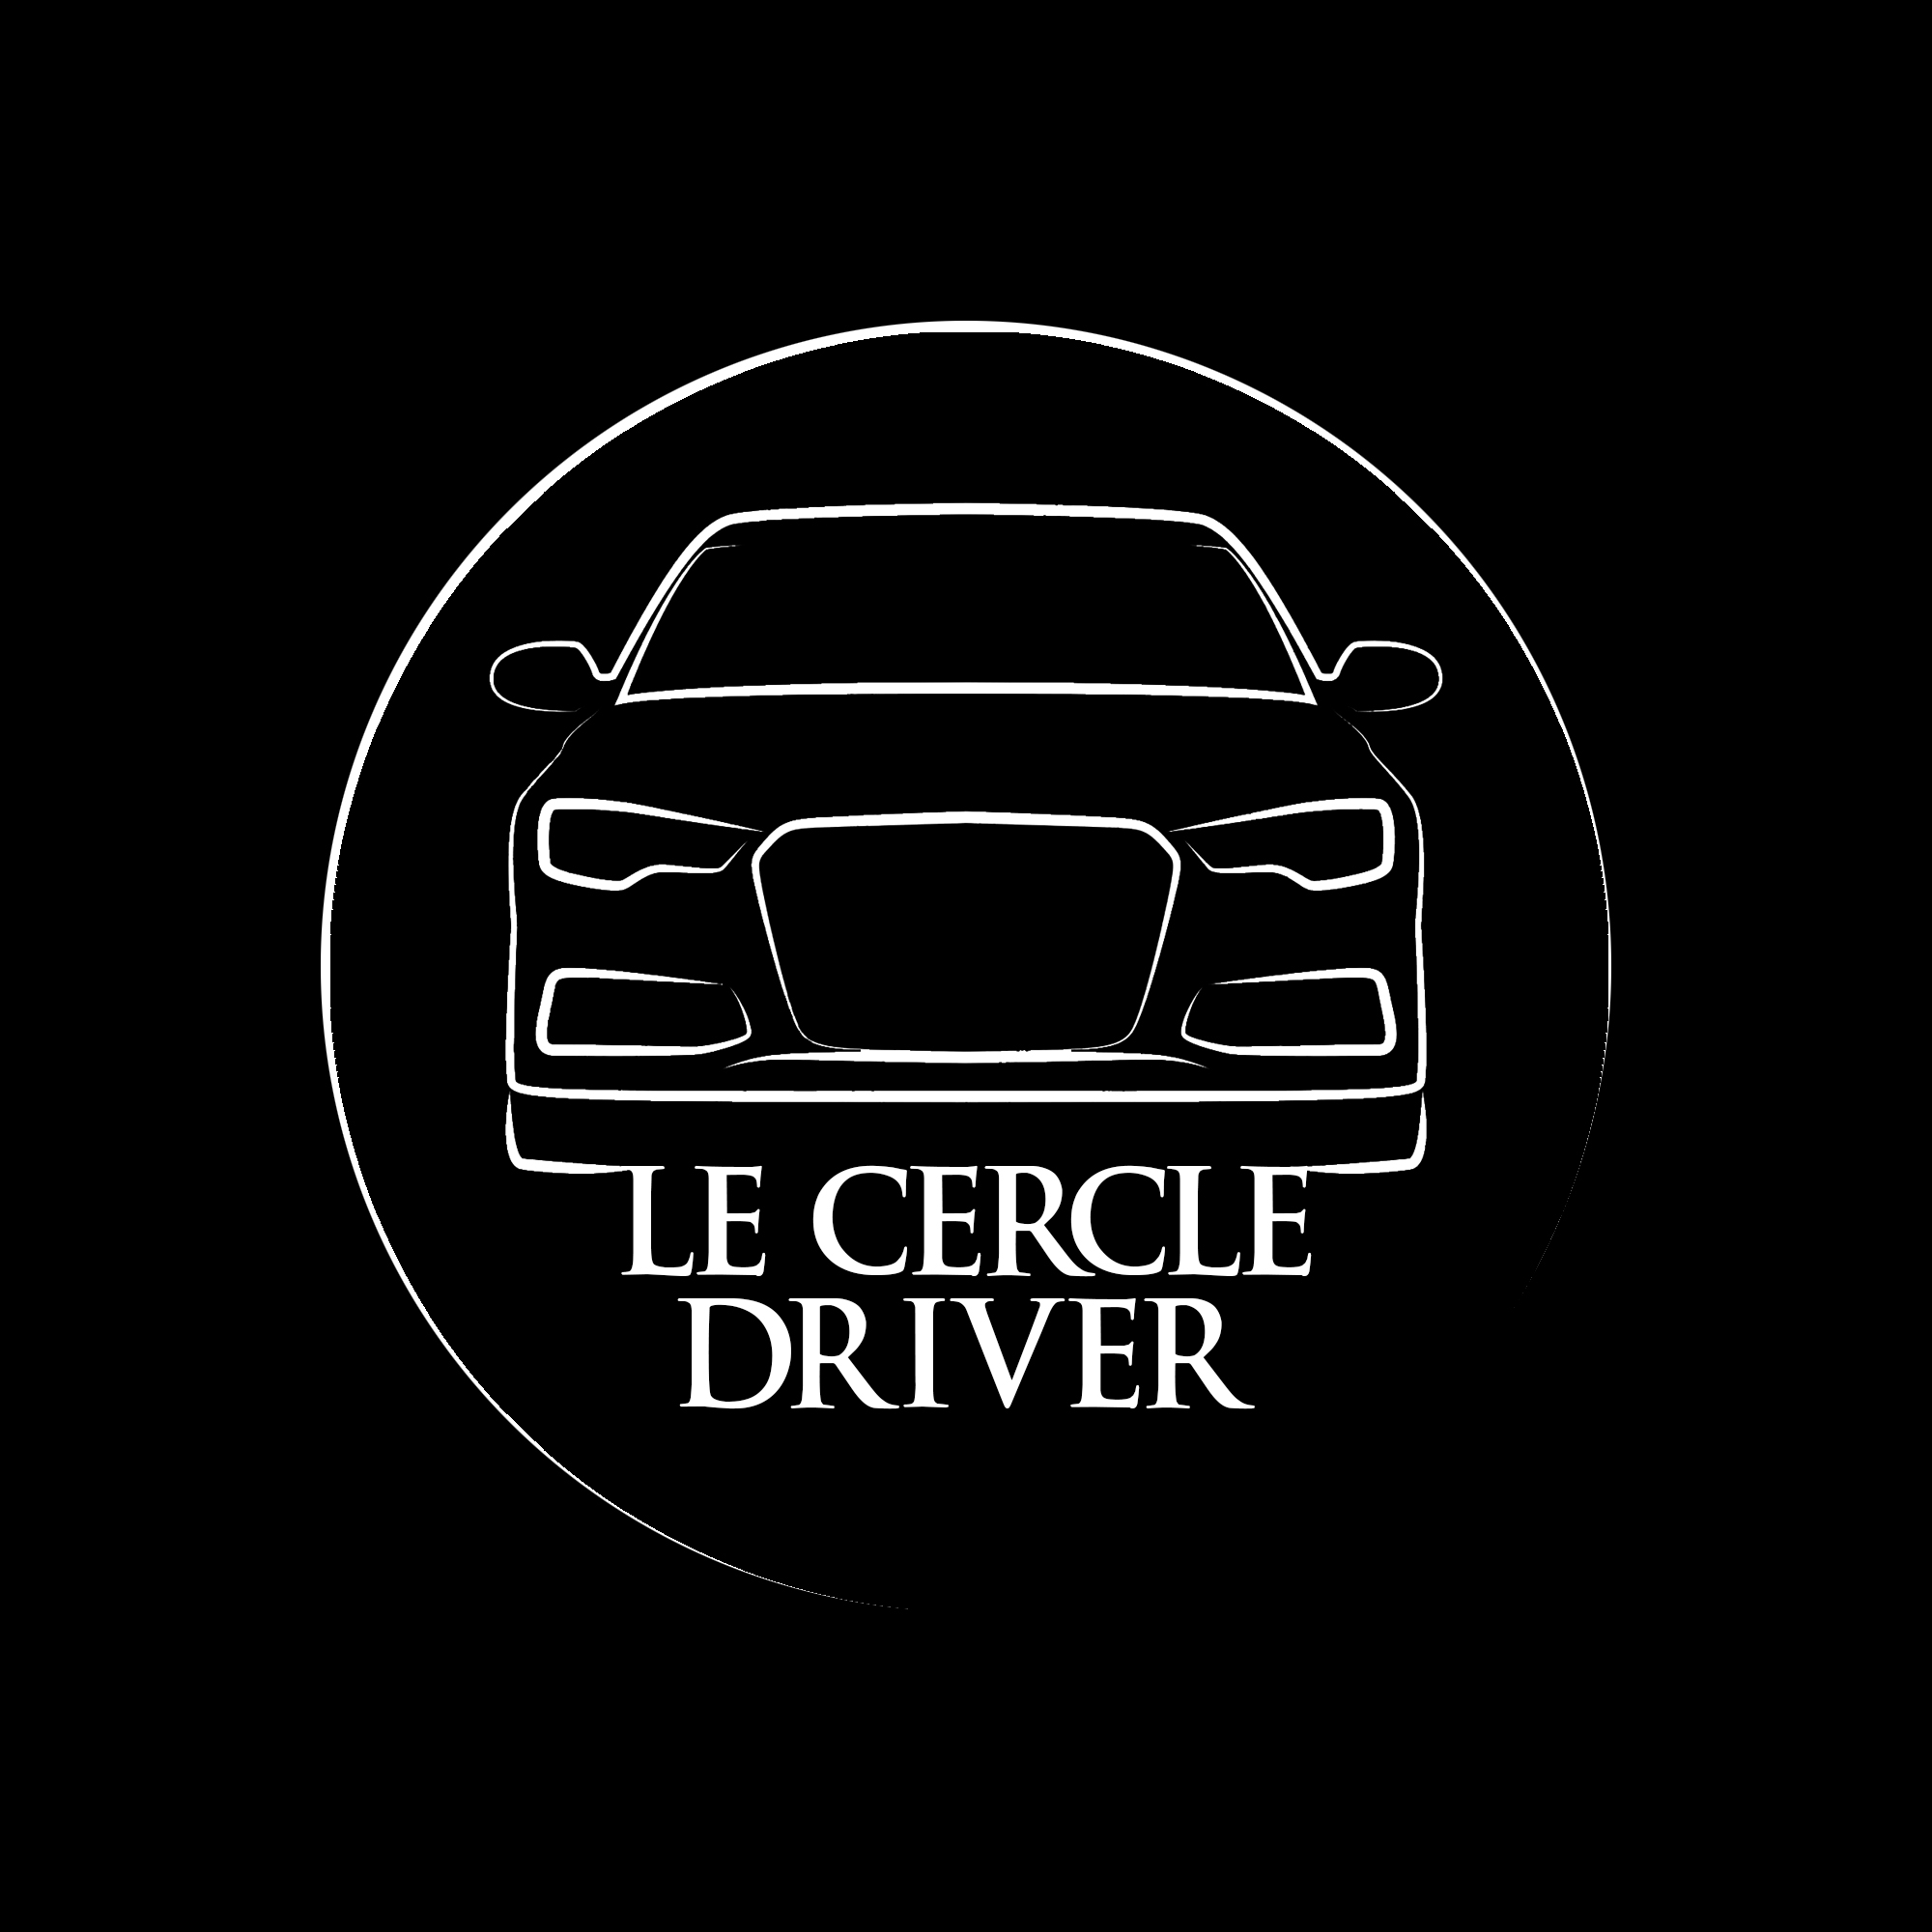 Logotype Le cercle driver